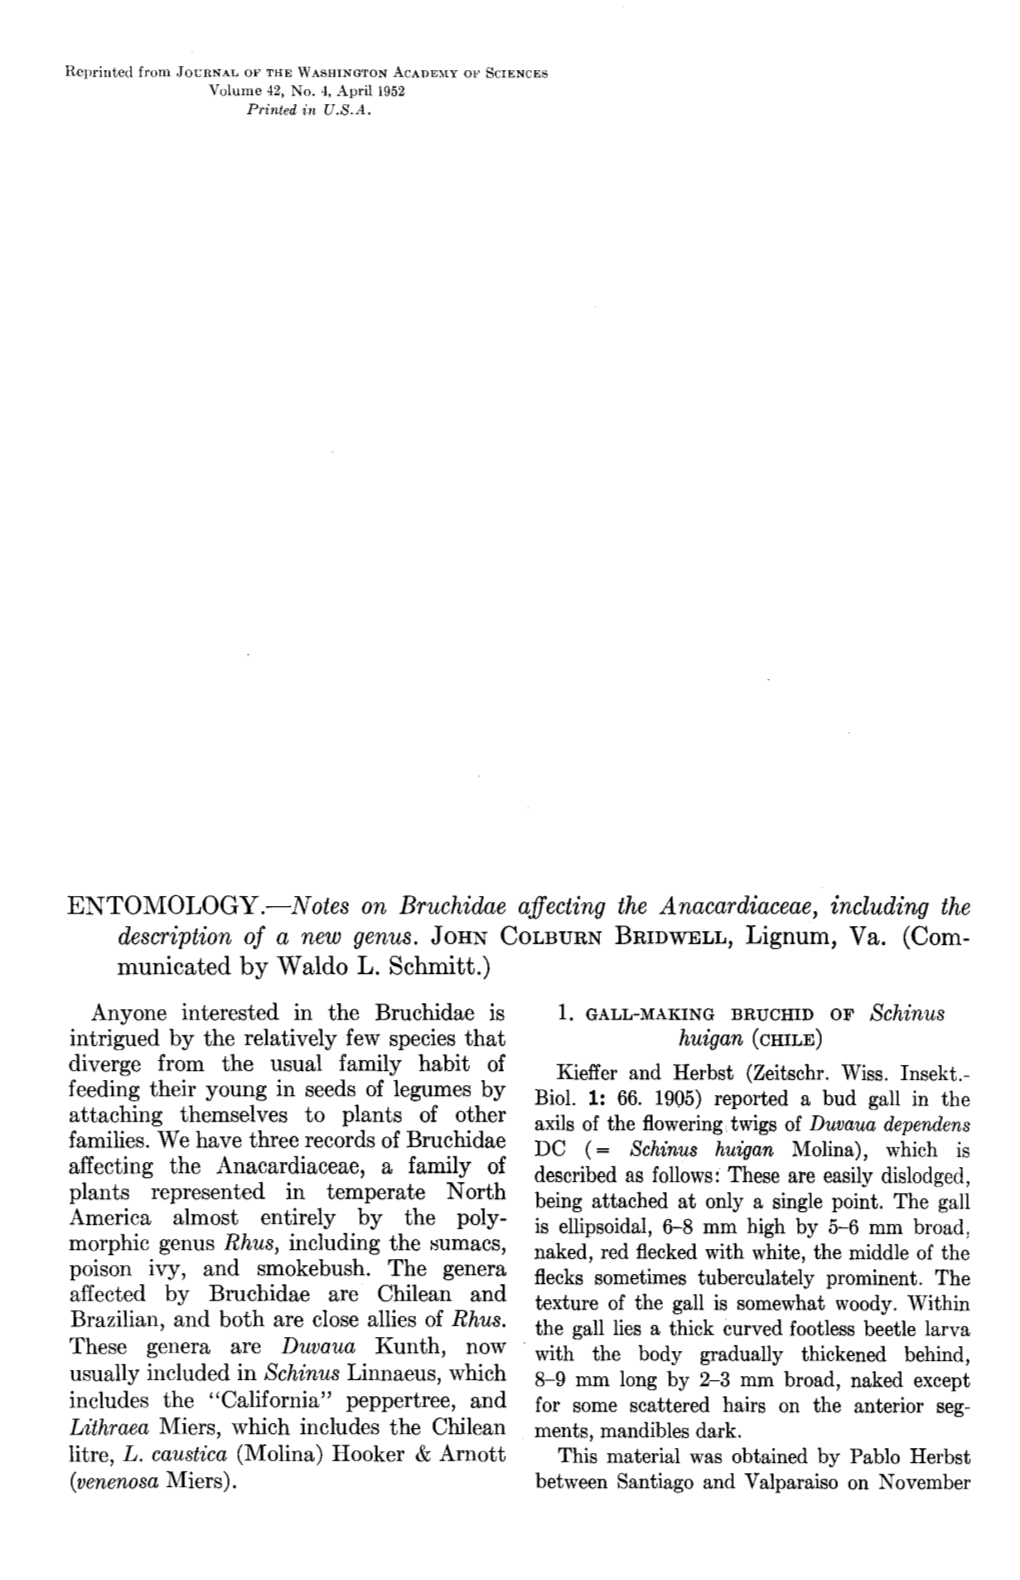 ENTOMOLOGY.-Notes on Bruchidae Affecting the Anacardiaceae, Including the Description of a New Genus